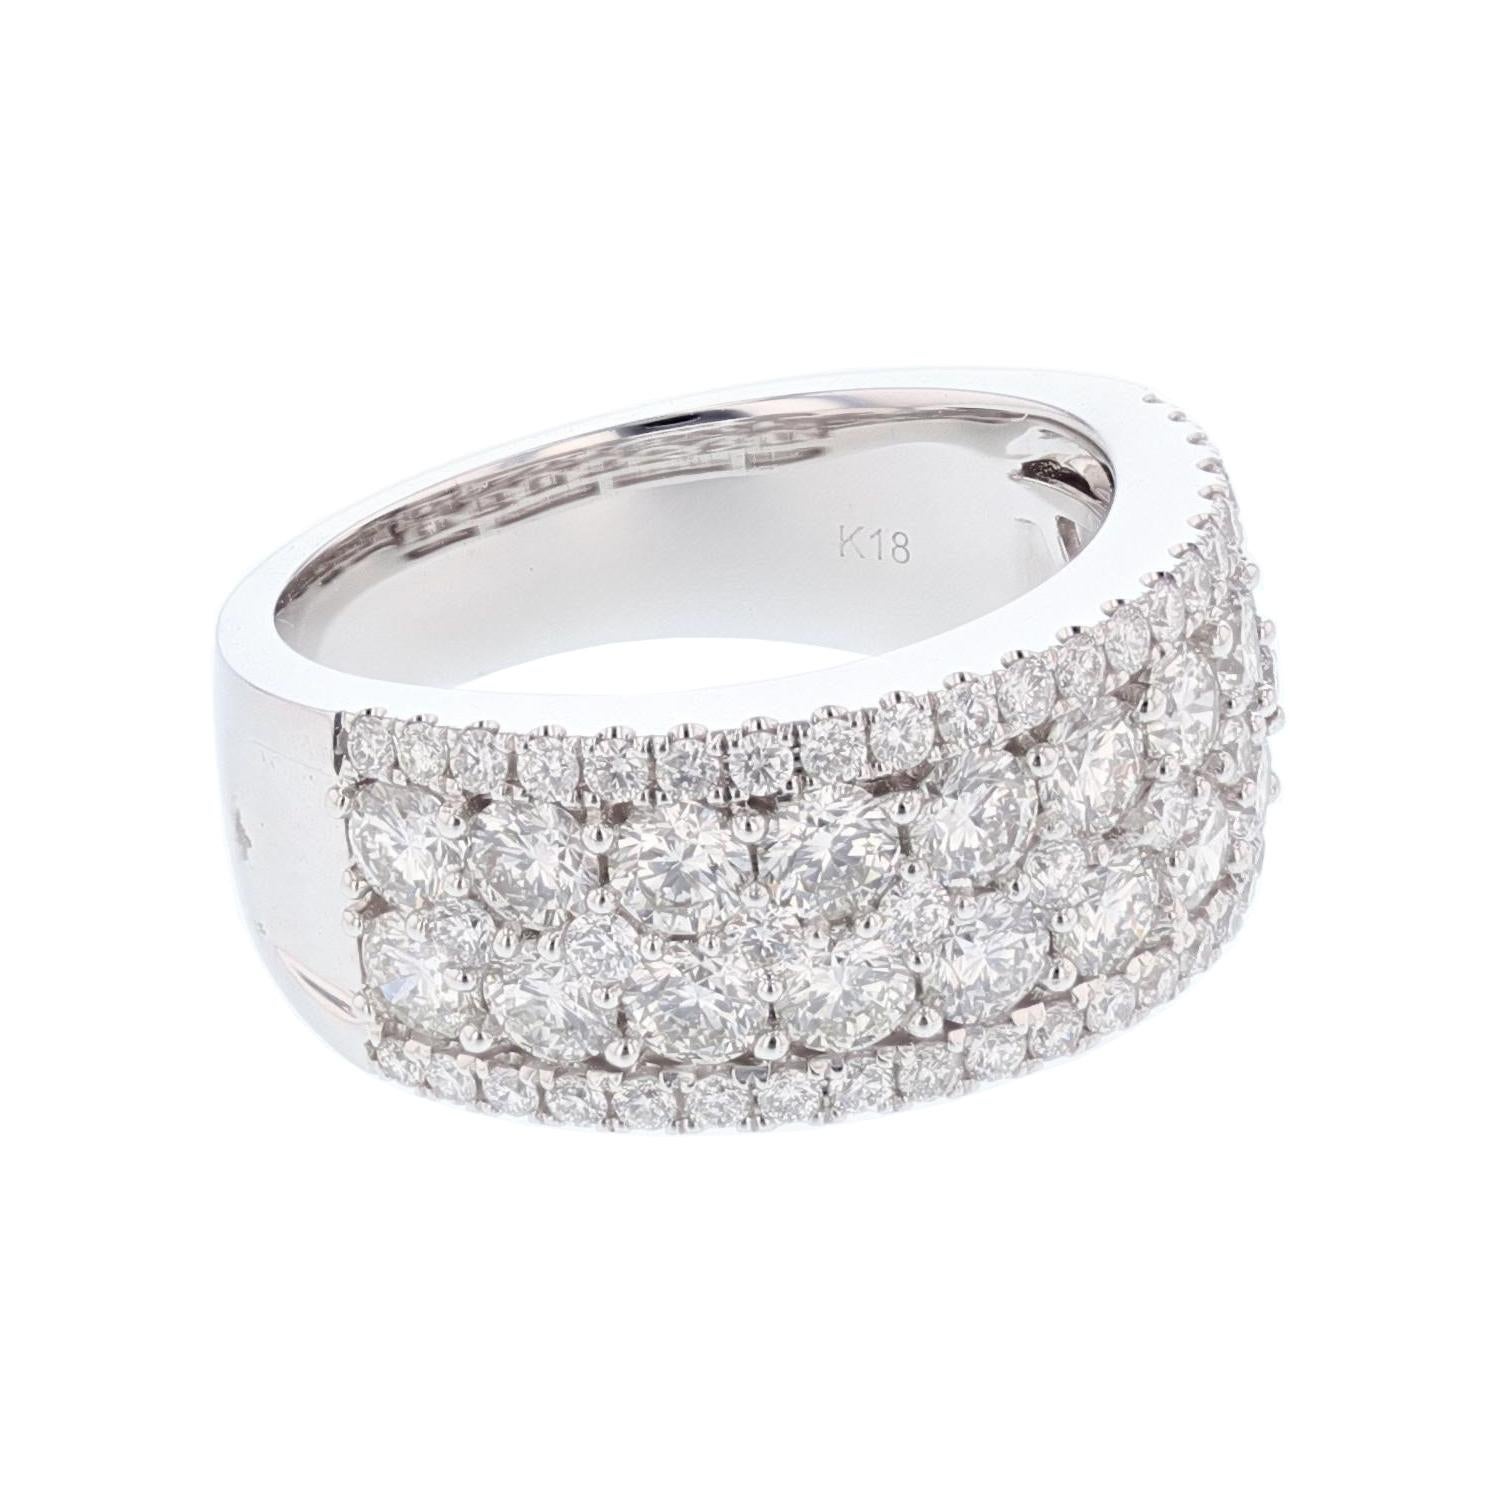 The ring is made in 18k white gold and features 71 round cut diamonds, prong set weighing 2.50cts with a color grade (H) and clarity grade (SI2). 